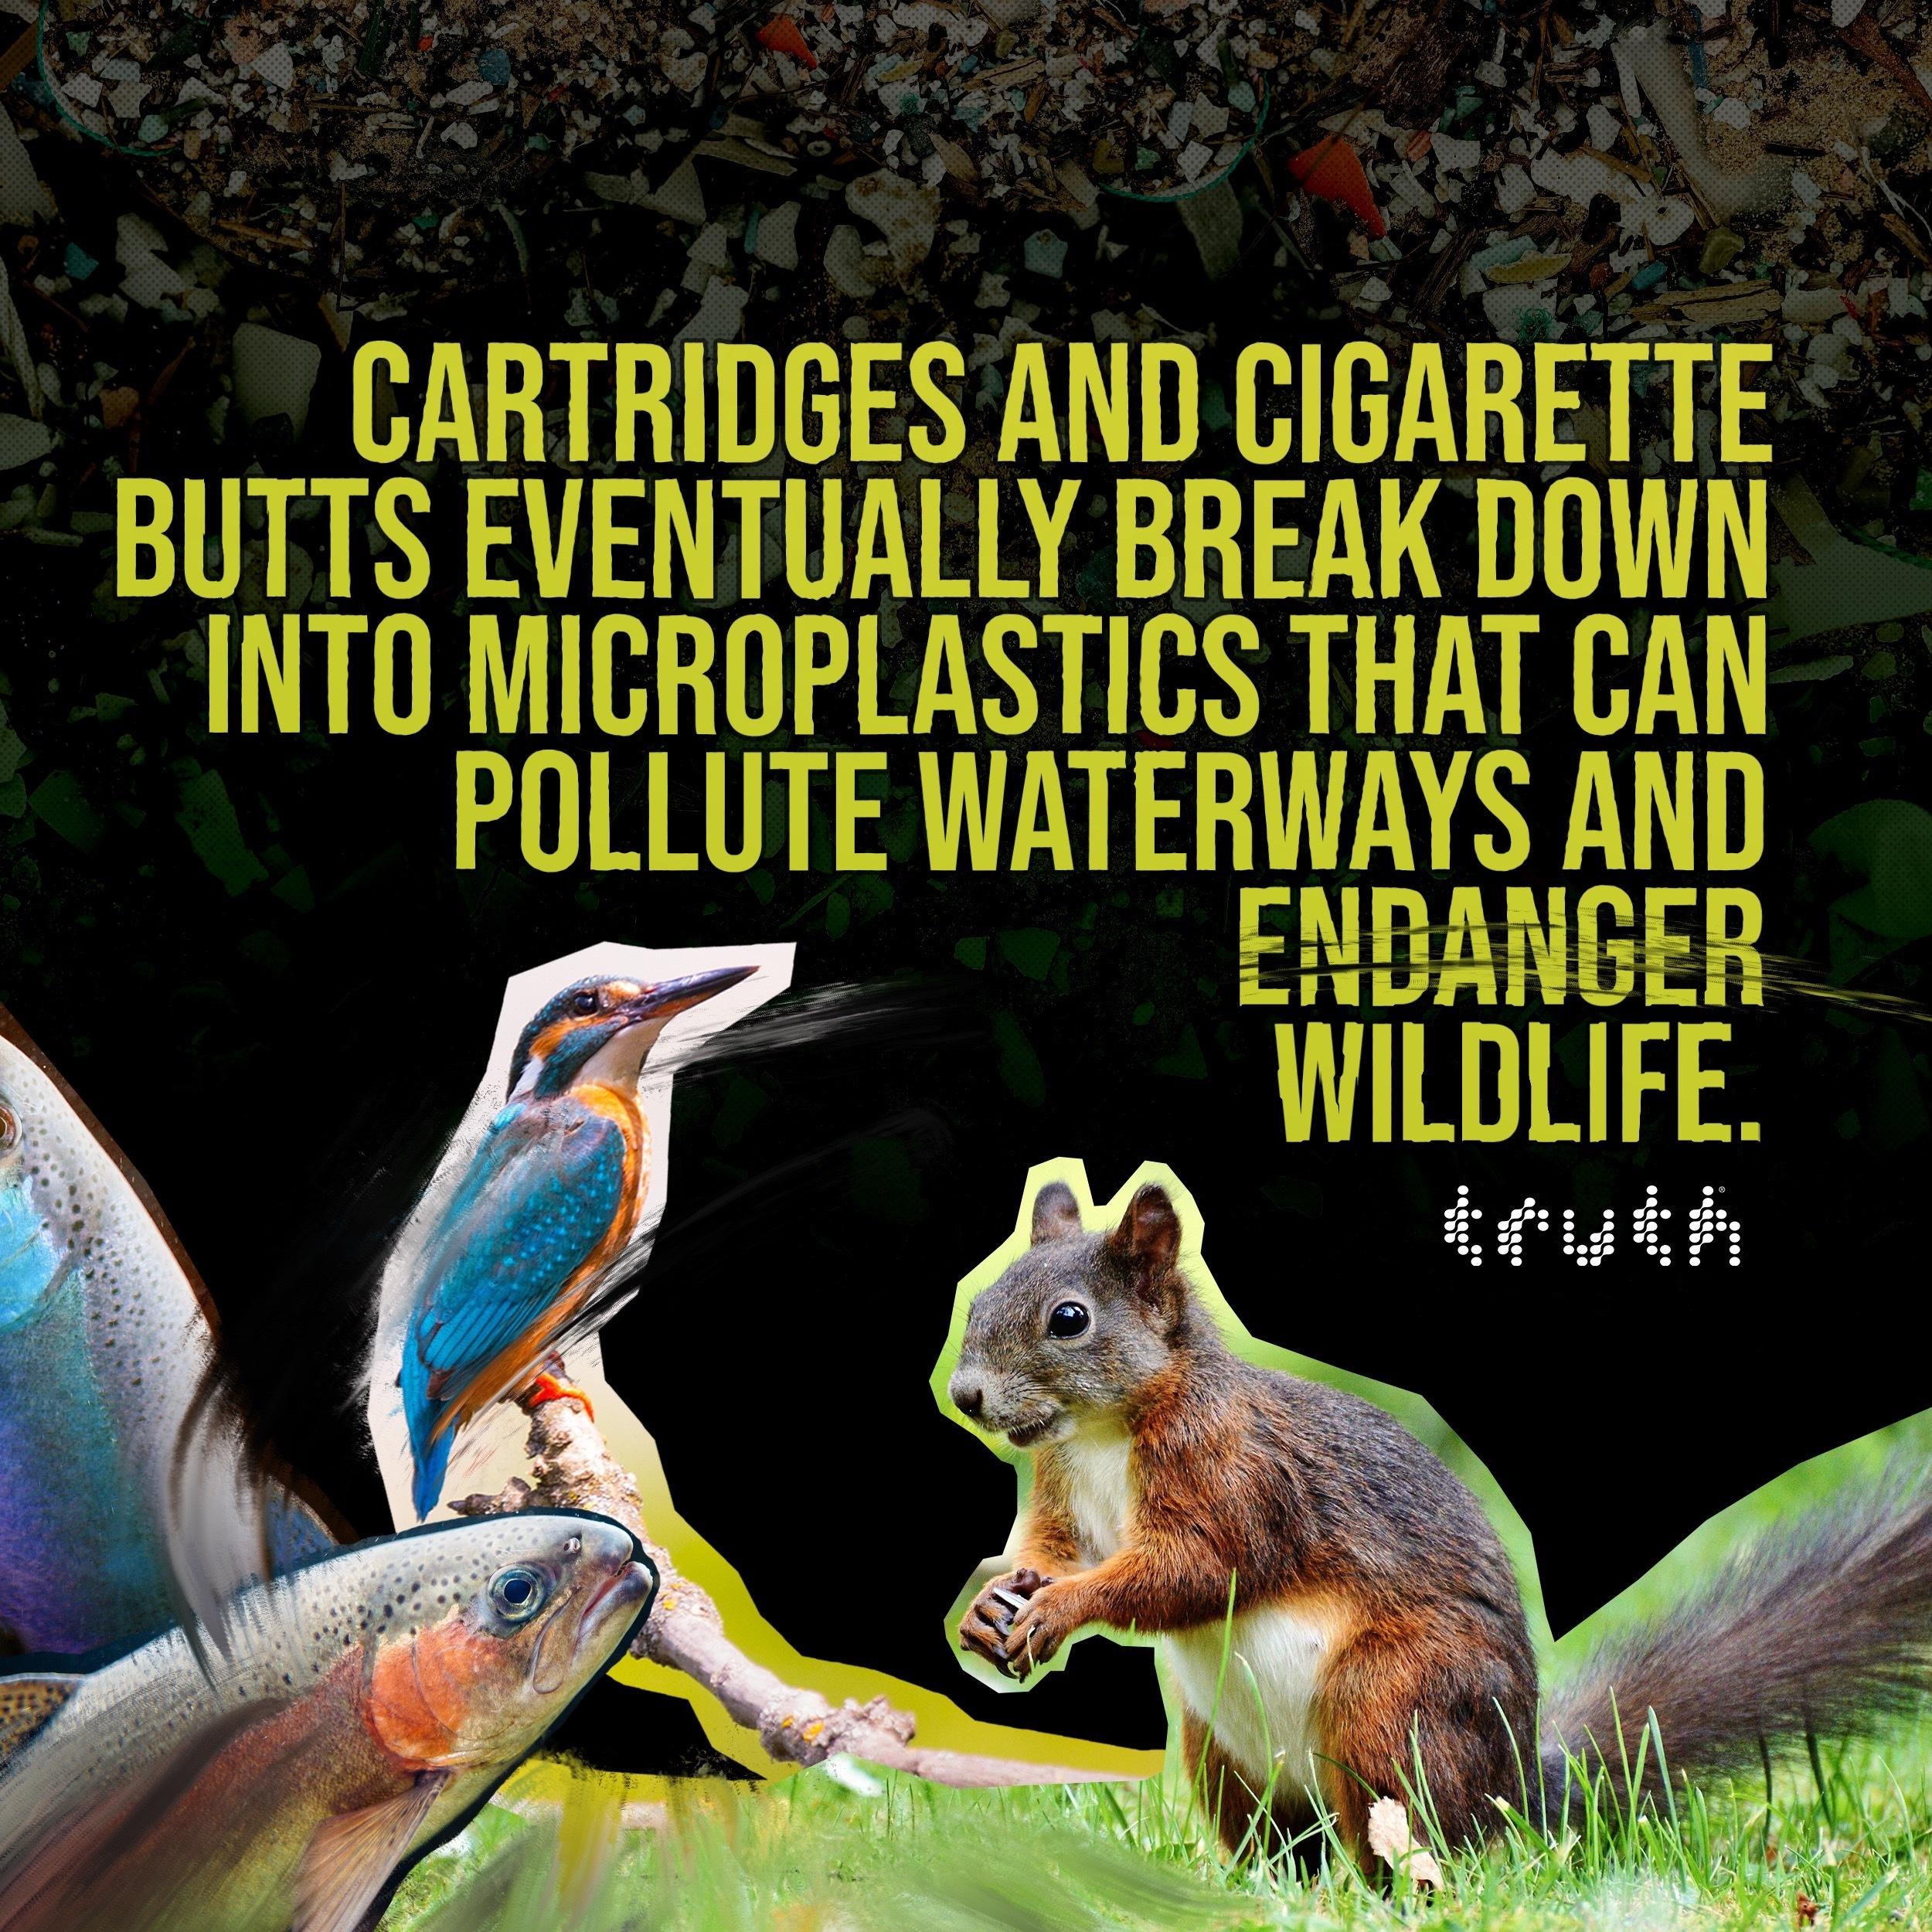 Cartridges and cigarette butts eventually break down into micro plastics that can pollute waterways and endanger wildlife.